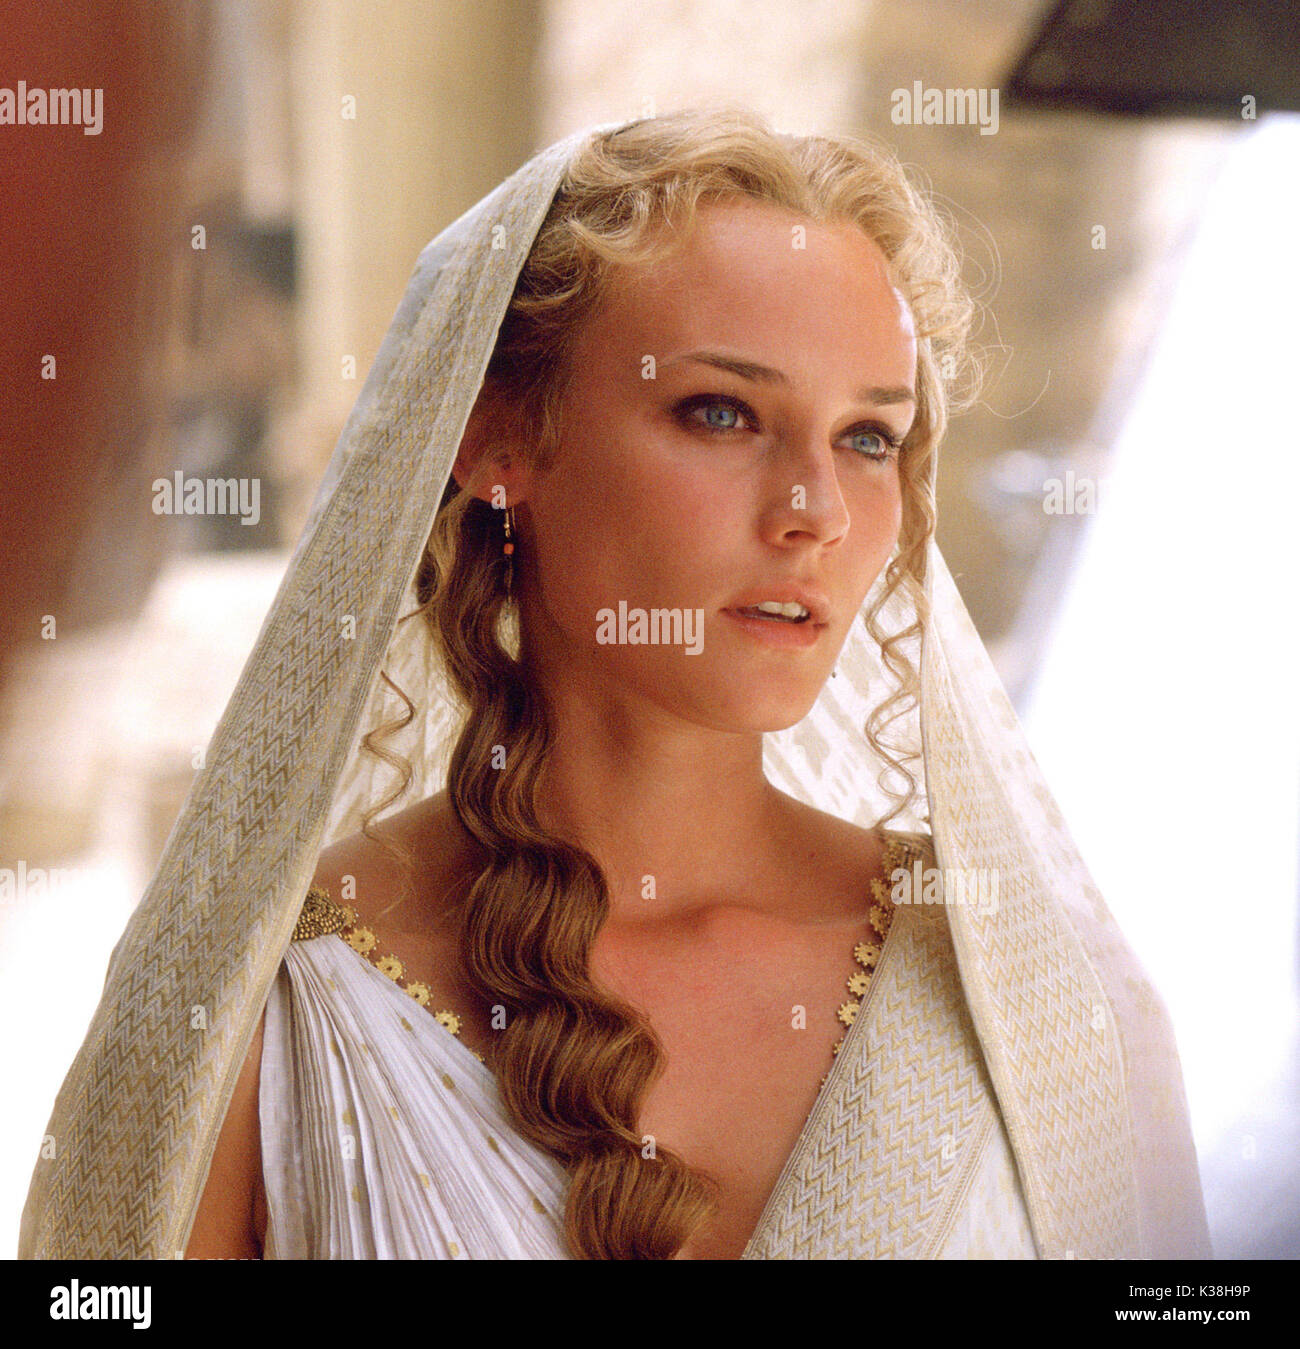 DIANE KRUGER as 'Helen' in Warner Bros. Pictures' epic action adventure Troy, starring Brad Pitt, Eric Bana and Orlando Bloom.  PHOTOGRAPHS TO BE USED SOLELY FOR ADVERTISING, PROMOTION, PUBLICITY OR REVIEWS OF THIS SPECIFIC MOTION PICTURE AND TO REMAIN THE PROPERTY OF THE STUDIO. NOT FOR SALE OR REDISTRIBUTION.    TROY [US 2004]  DIANE KRUGER DIANE KRUGER as 'Helen' in Warner Bros. Pictures' epic action adventure Troy, starring Brad Pitt, Eric Bana and Orlando Bloom.  PHOTOGRAPHS TO BE USED SOLELY FOR ADVERTISING, PROMOTION, PUBLICITY OR REVIEWS OF THIS SPECIFIC MOTION Stock Photo